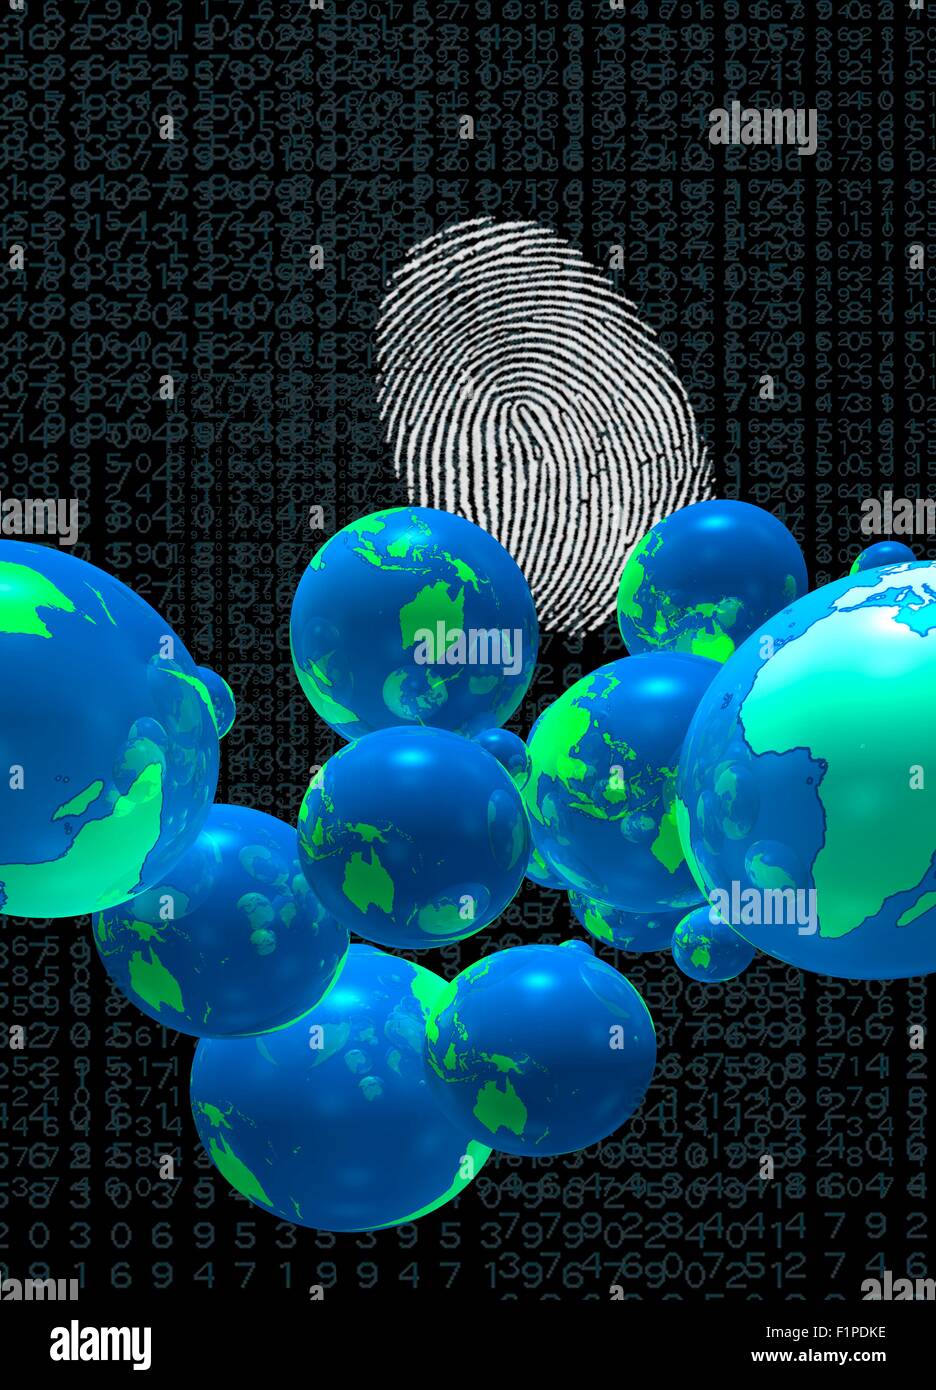 Finger print and globes, computer illustration. Stock Photo